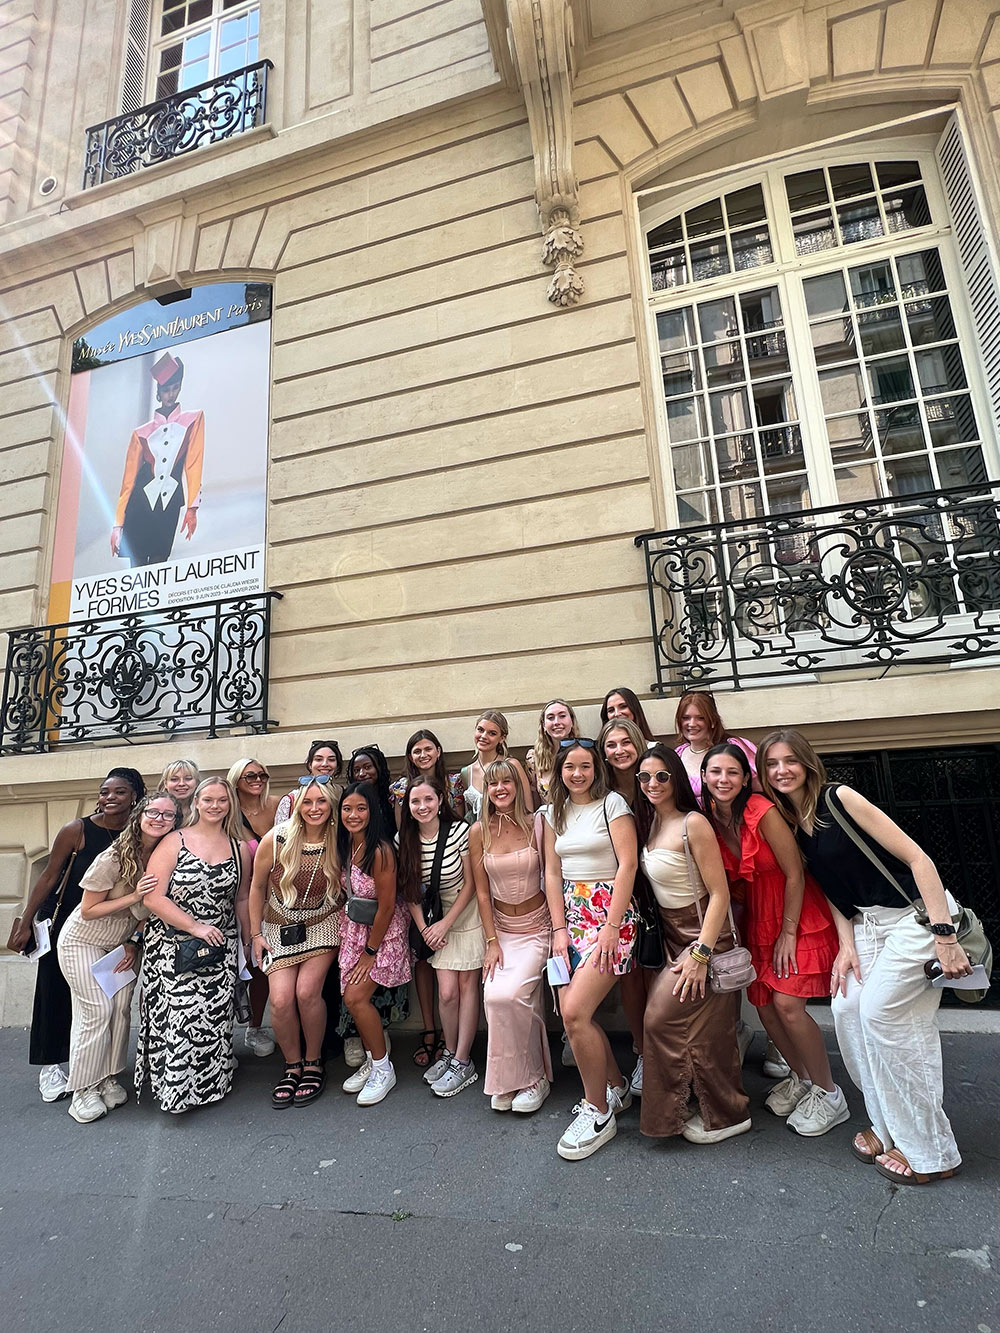  Department of Art and Fashion Design &amp; Merchandising students outside the Musée Yves Saint Laurent in Paris, France. Students viewed the exhibition “Formes” to see the connections between artworks by German artist Claudia Weisner and fashions designed by iconic French designer Yves Saint Laurent.